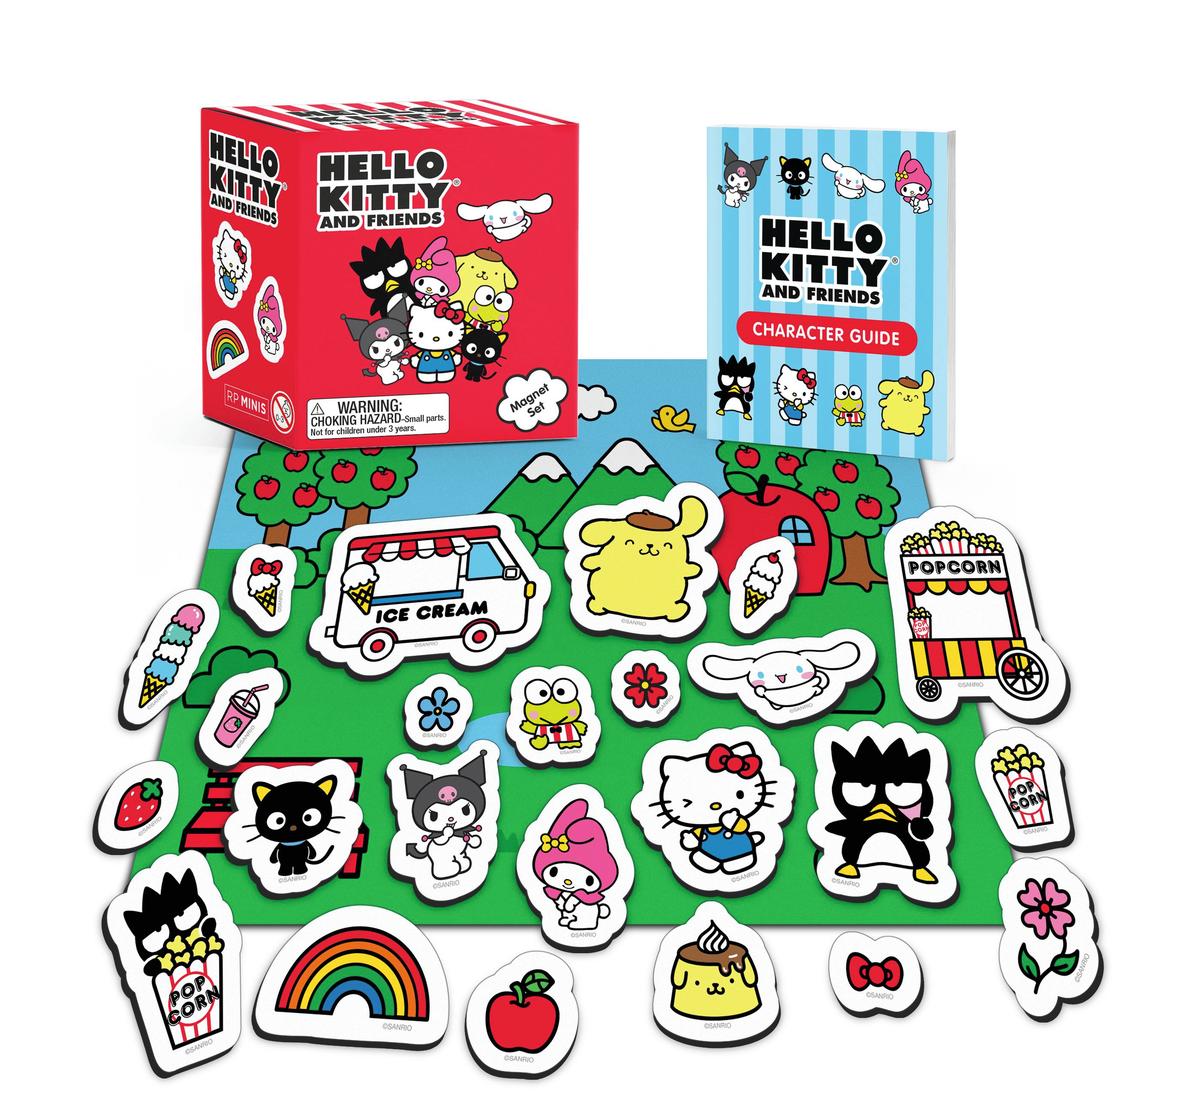 Hello Kitty and Friends Magnet Set - 